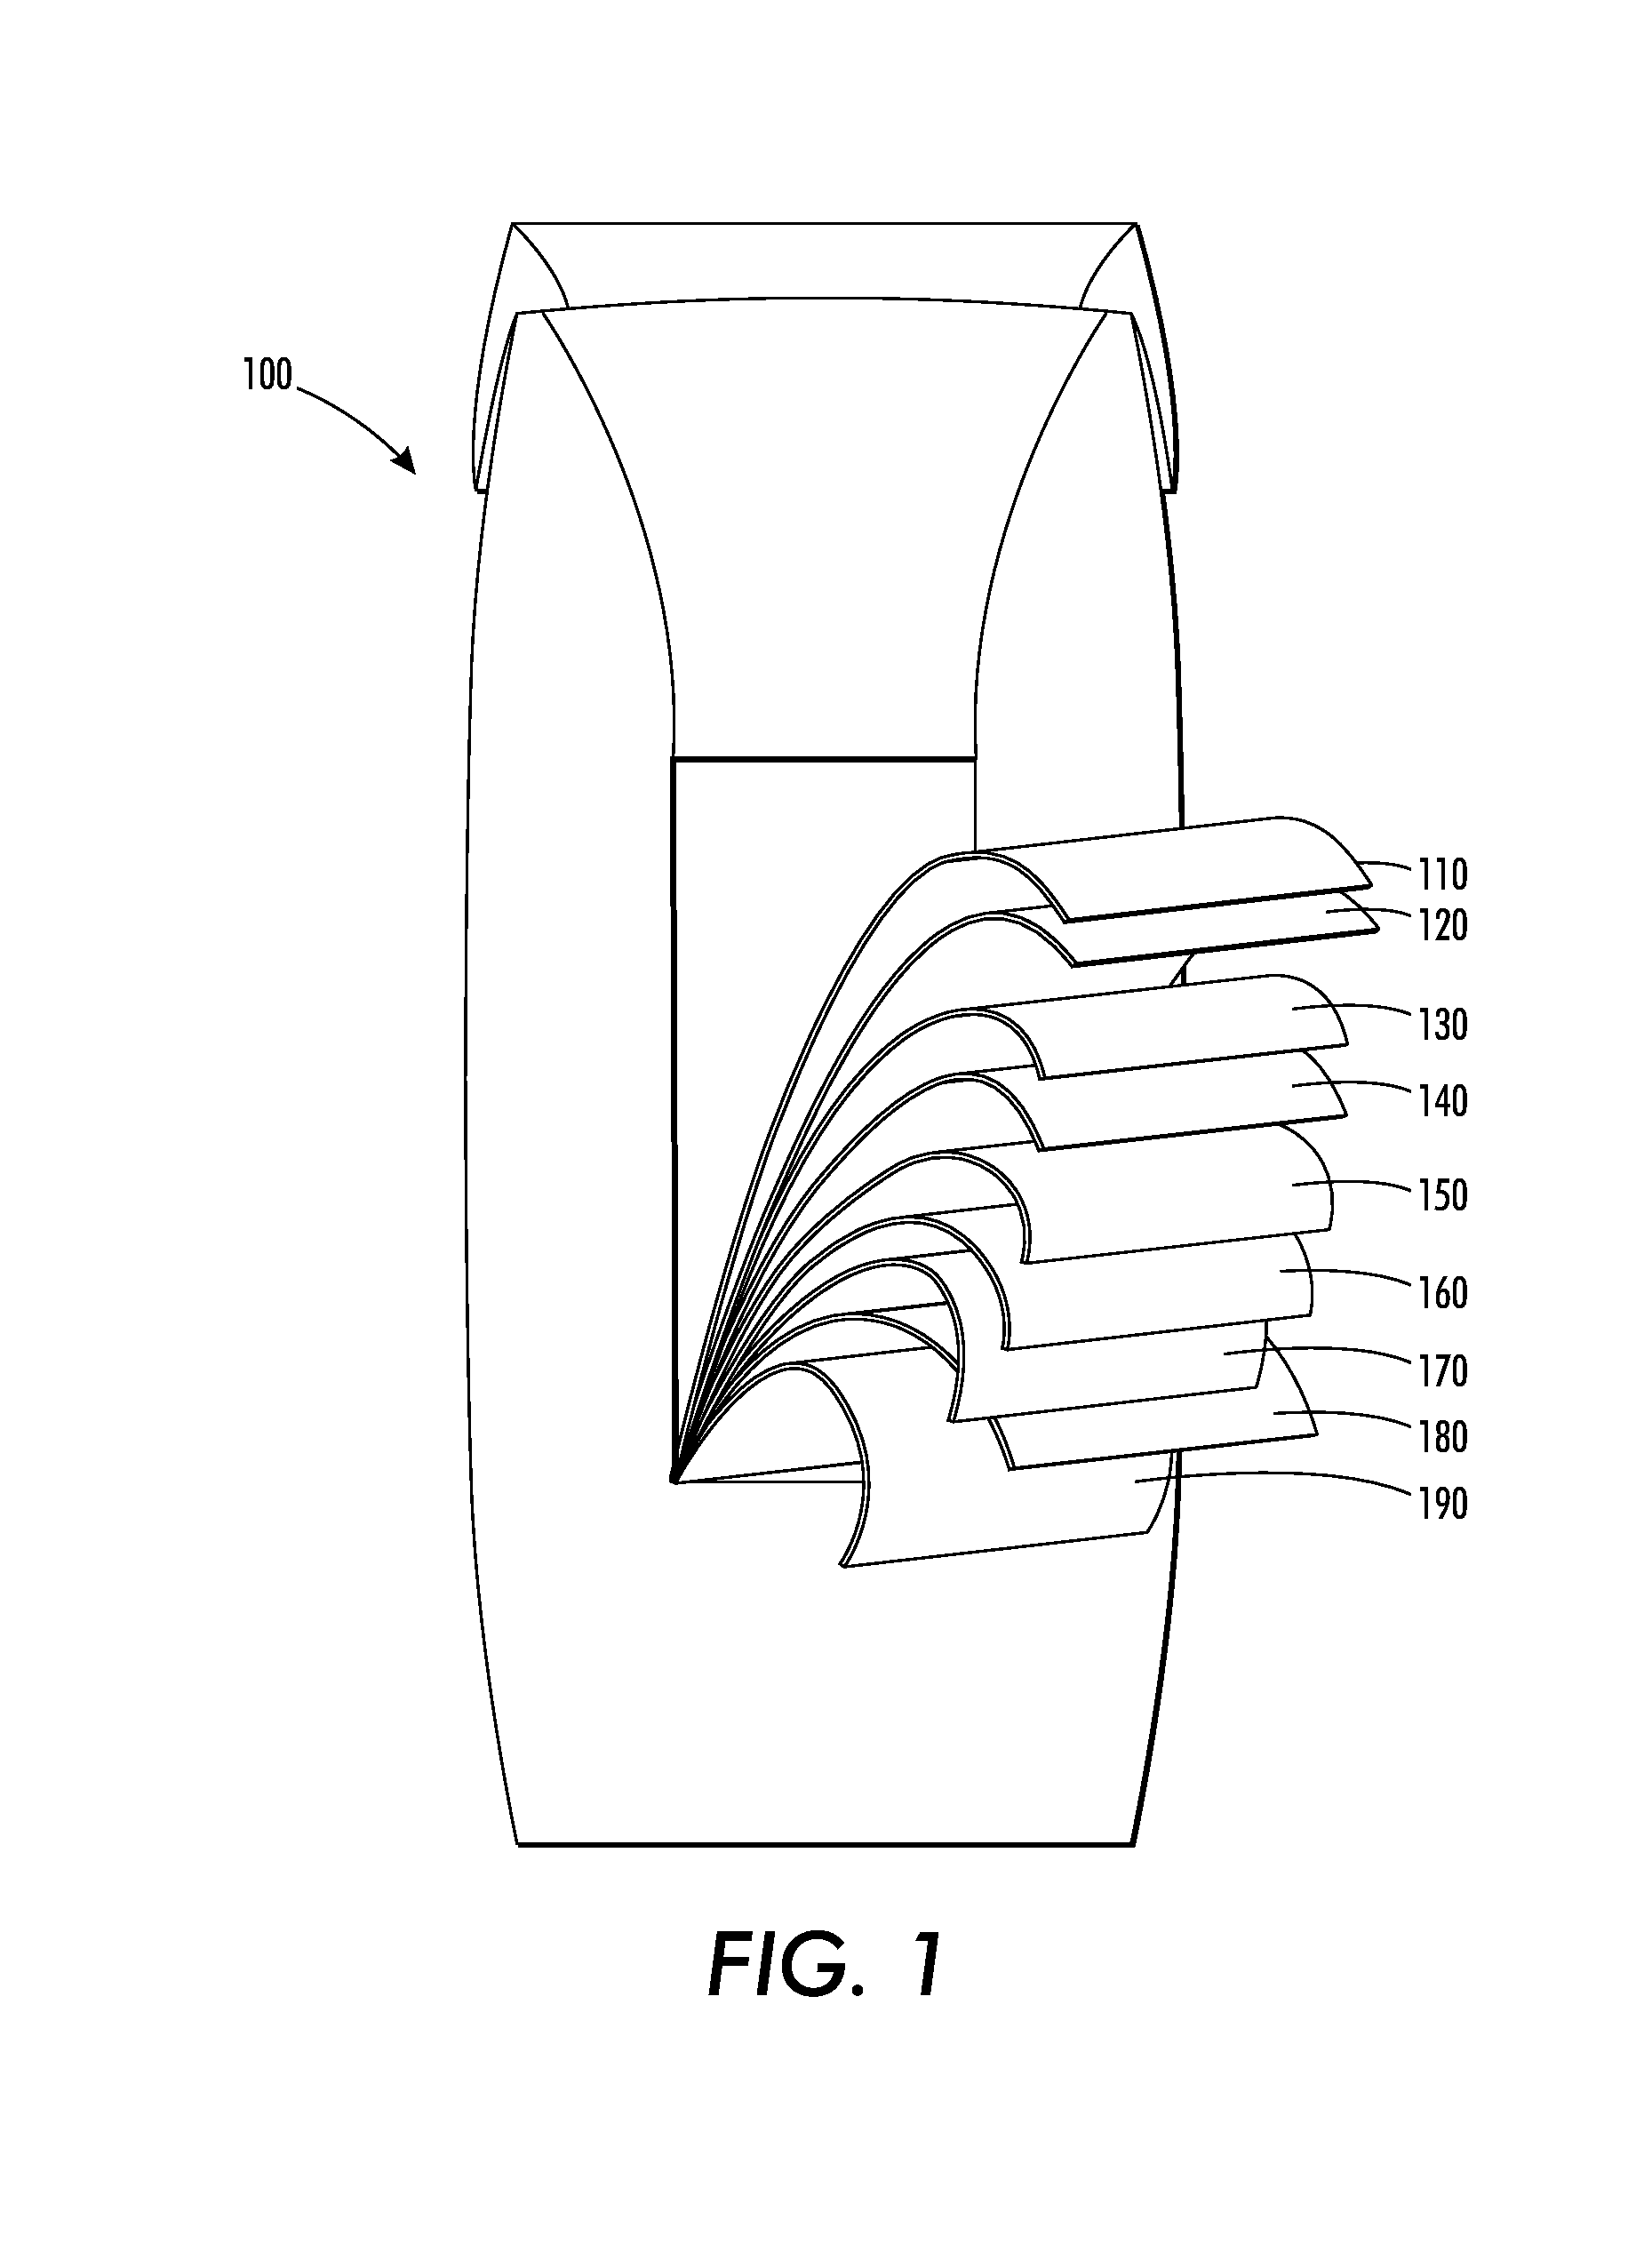 Systems and methods for producing solid ink laminate security features